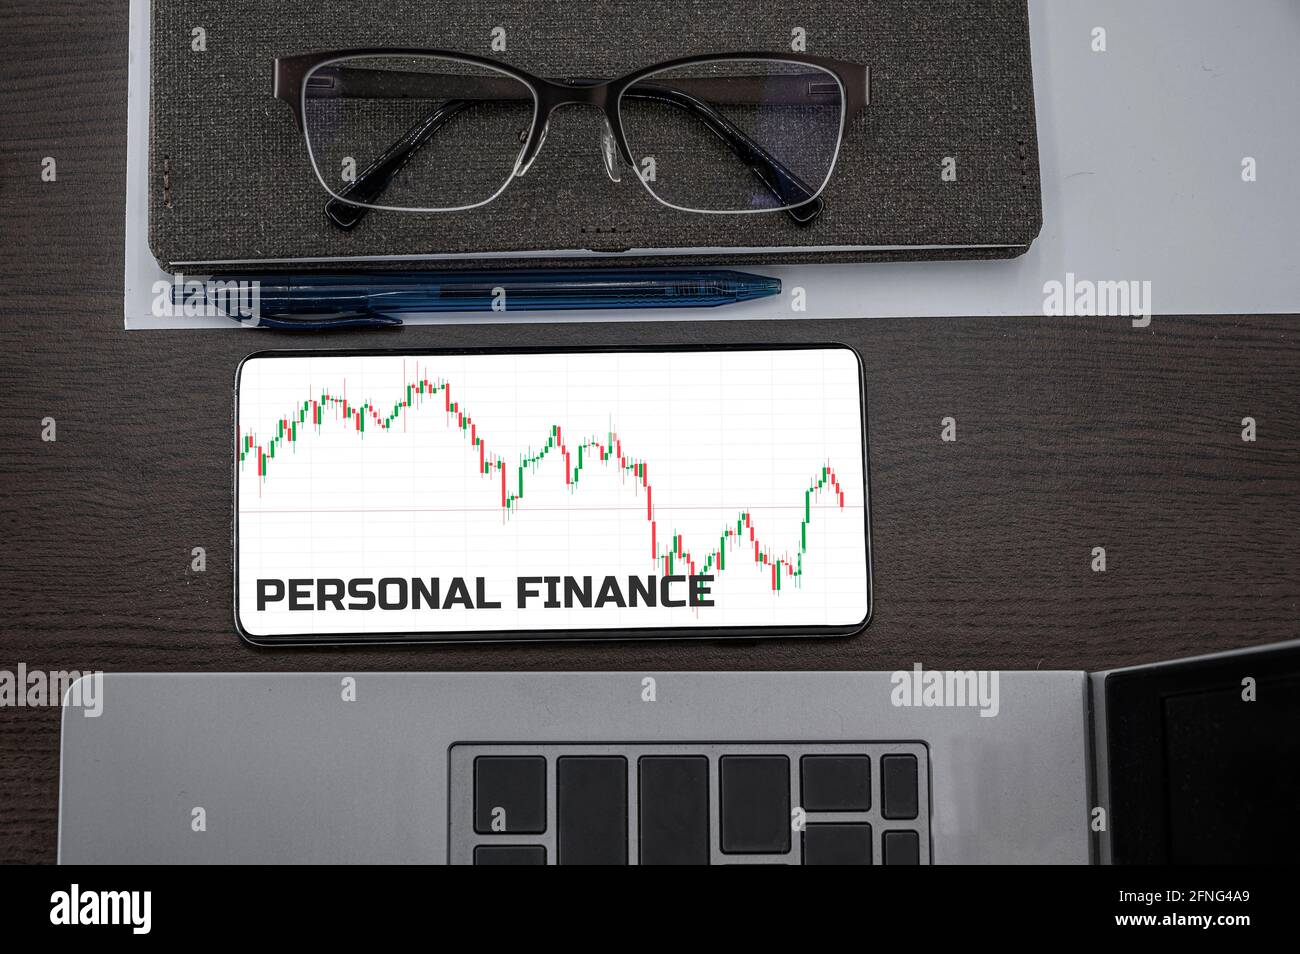 Personal finance concept. Top view of stocks price candlestick chart in phone on table near laptop, notepad and glasses with inscription. Business, fi Stock Photo